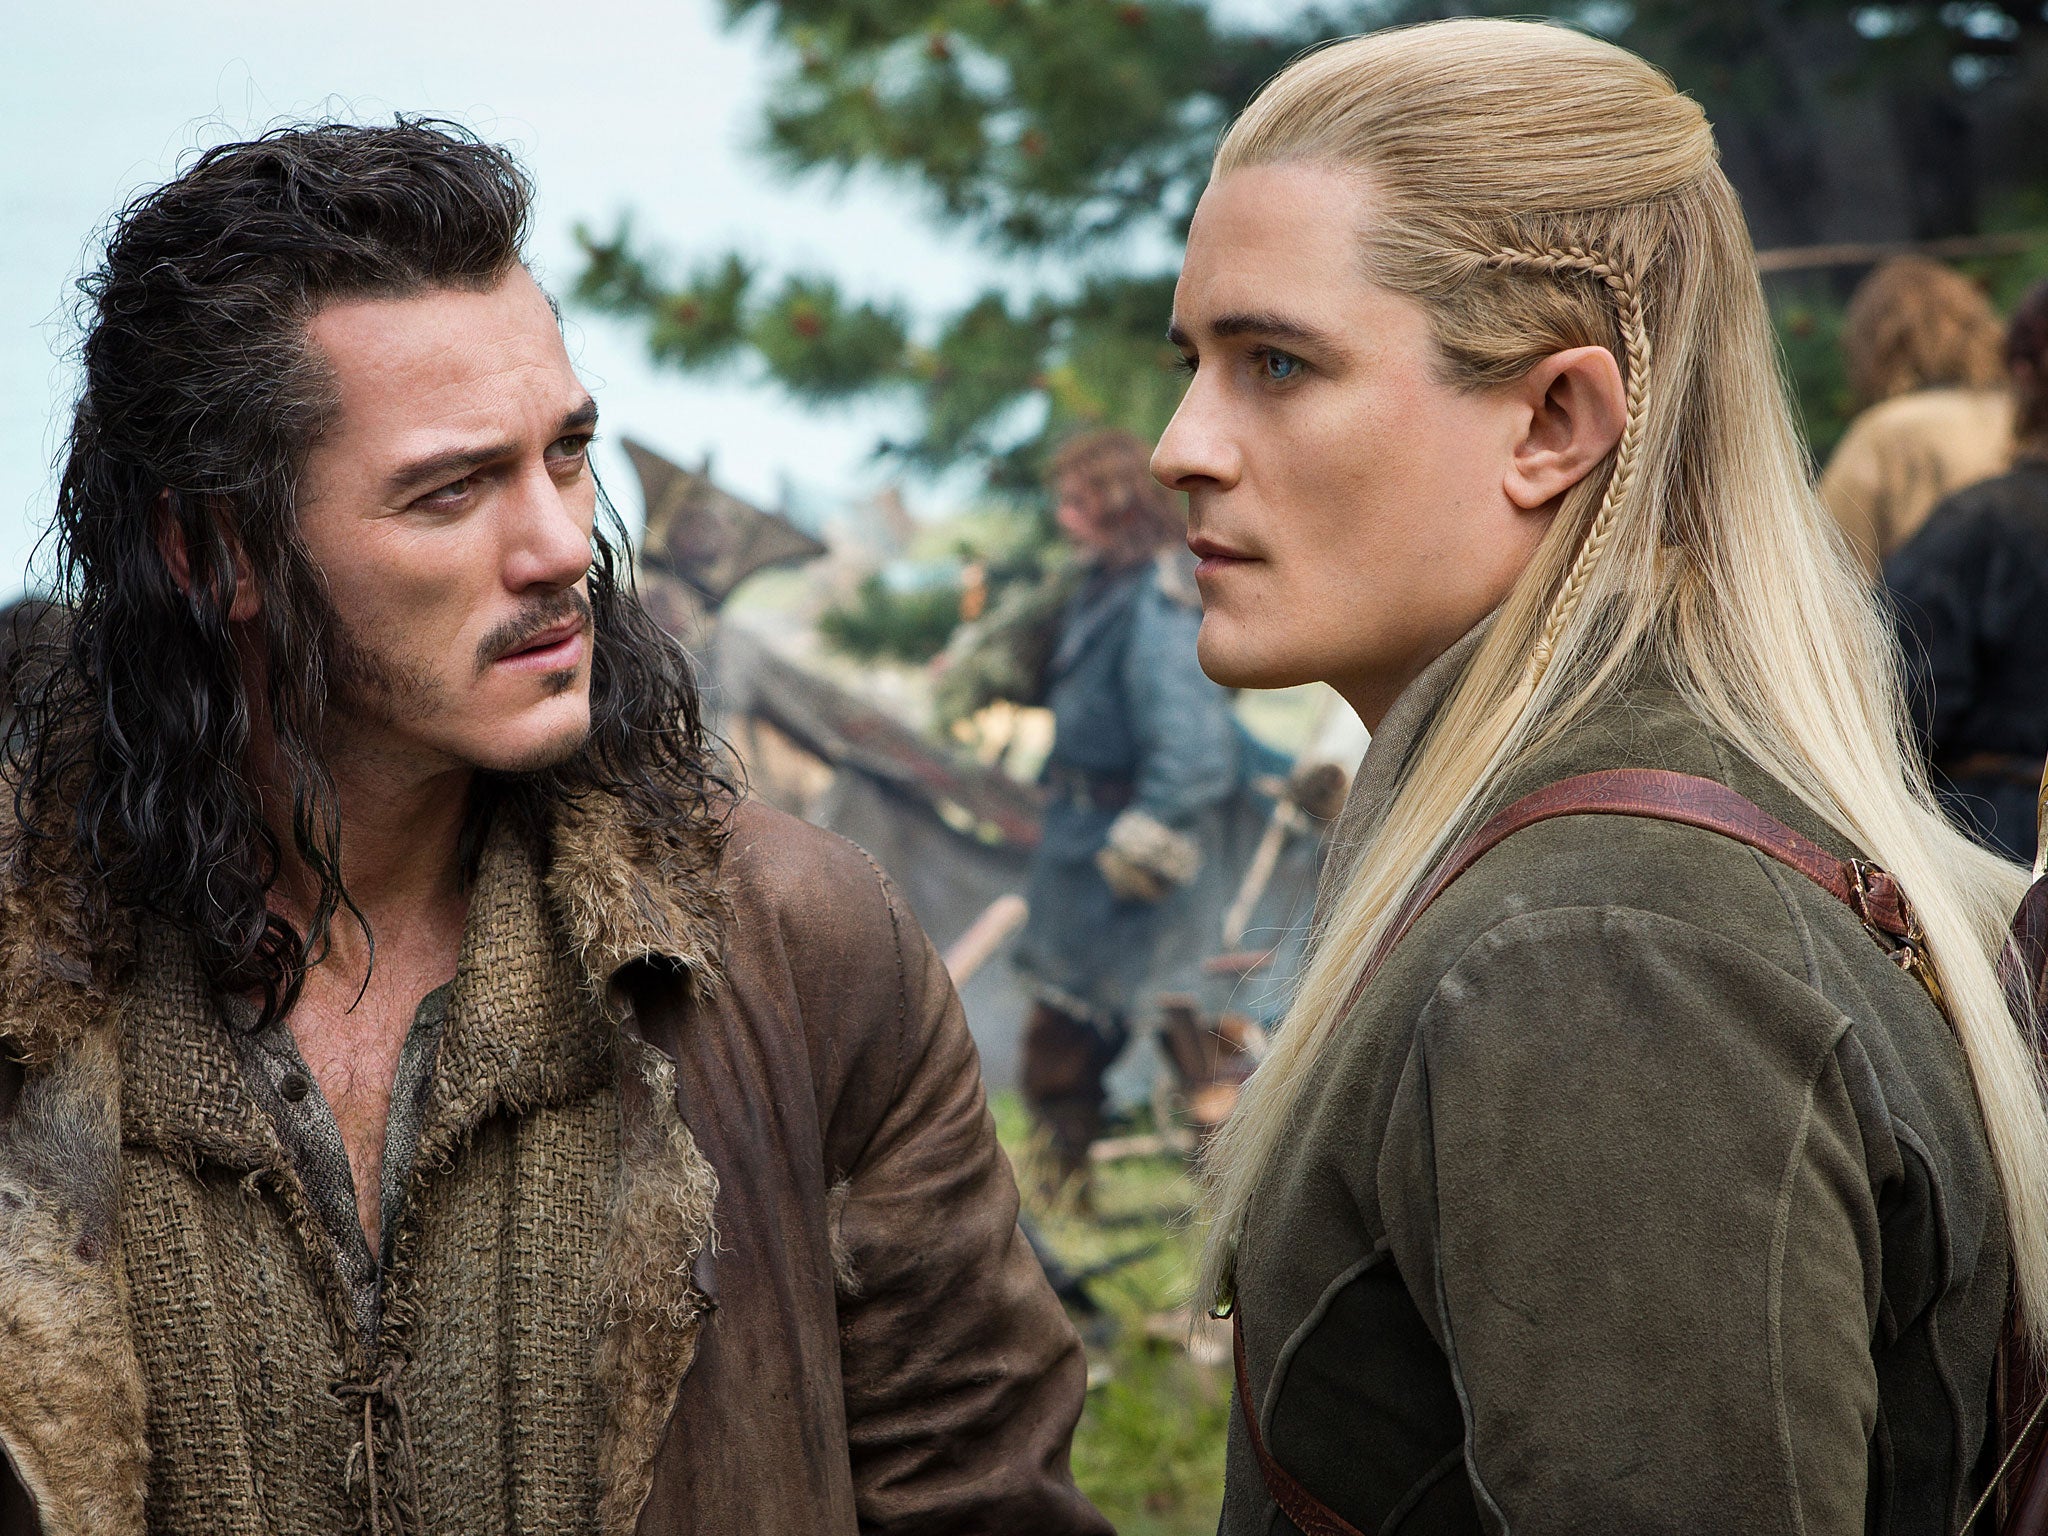 Quiet empathy: Luke Evans as Bard the Bowman and Orlando Bloom as Legolas in Peter Jackson’s ‘The Hobbit’